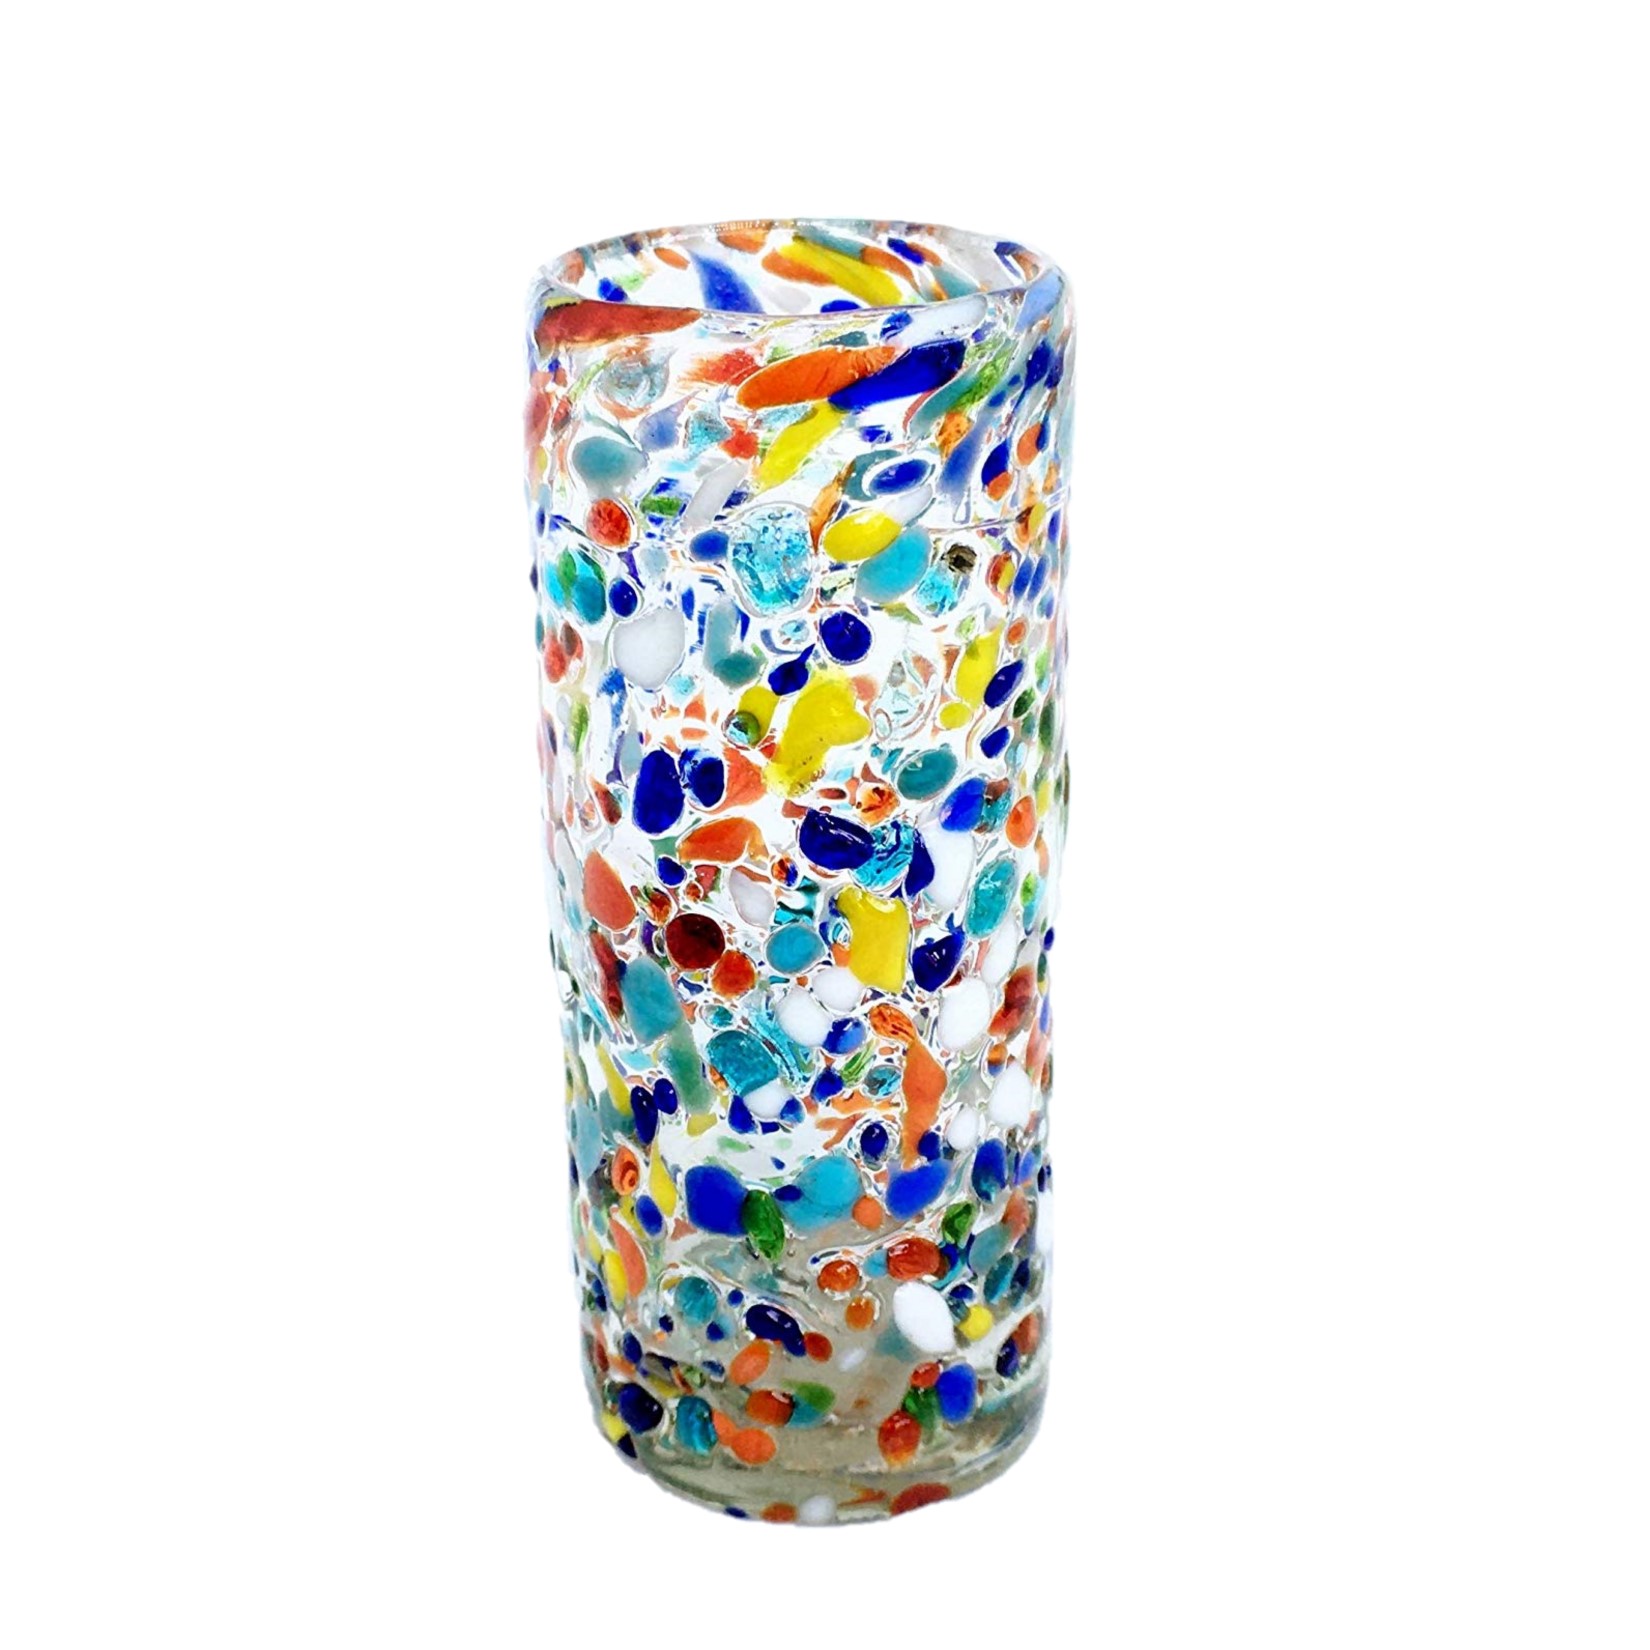 Wholesale Tequila Shot Glasses / Confetti Rocks 2 oz Tequila Shot Glasses  / Sip your favorite Tequila or Mezcal with these iconic Confetti Rocks shot glasses, which are a must-have of any bar. Crafted one by one by skilled artisans in Tonala, Mexico, each glass is different from the next making them unique works of art. They feature our colorful Confetti rocks design with small colored-glass rounded cristals embedded in clear glass that give them a nice feeling and grip. These shot glasses are festive and fun, making them a perfect gift for anyone. Get ready for your next fiesta!!